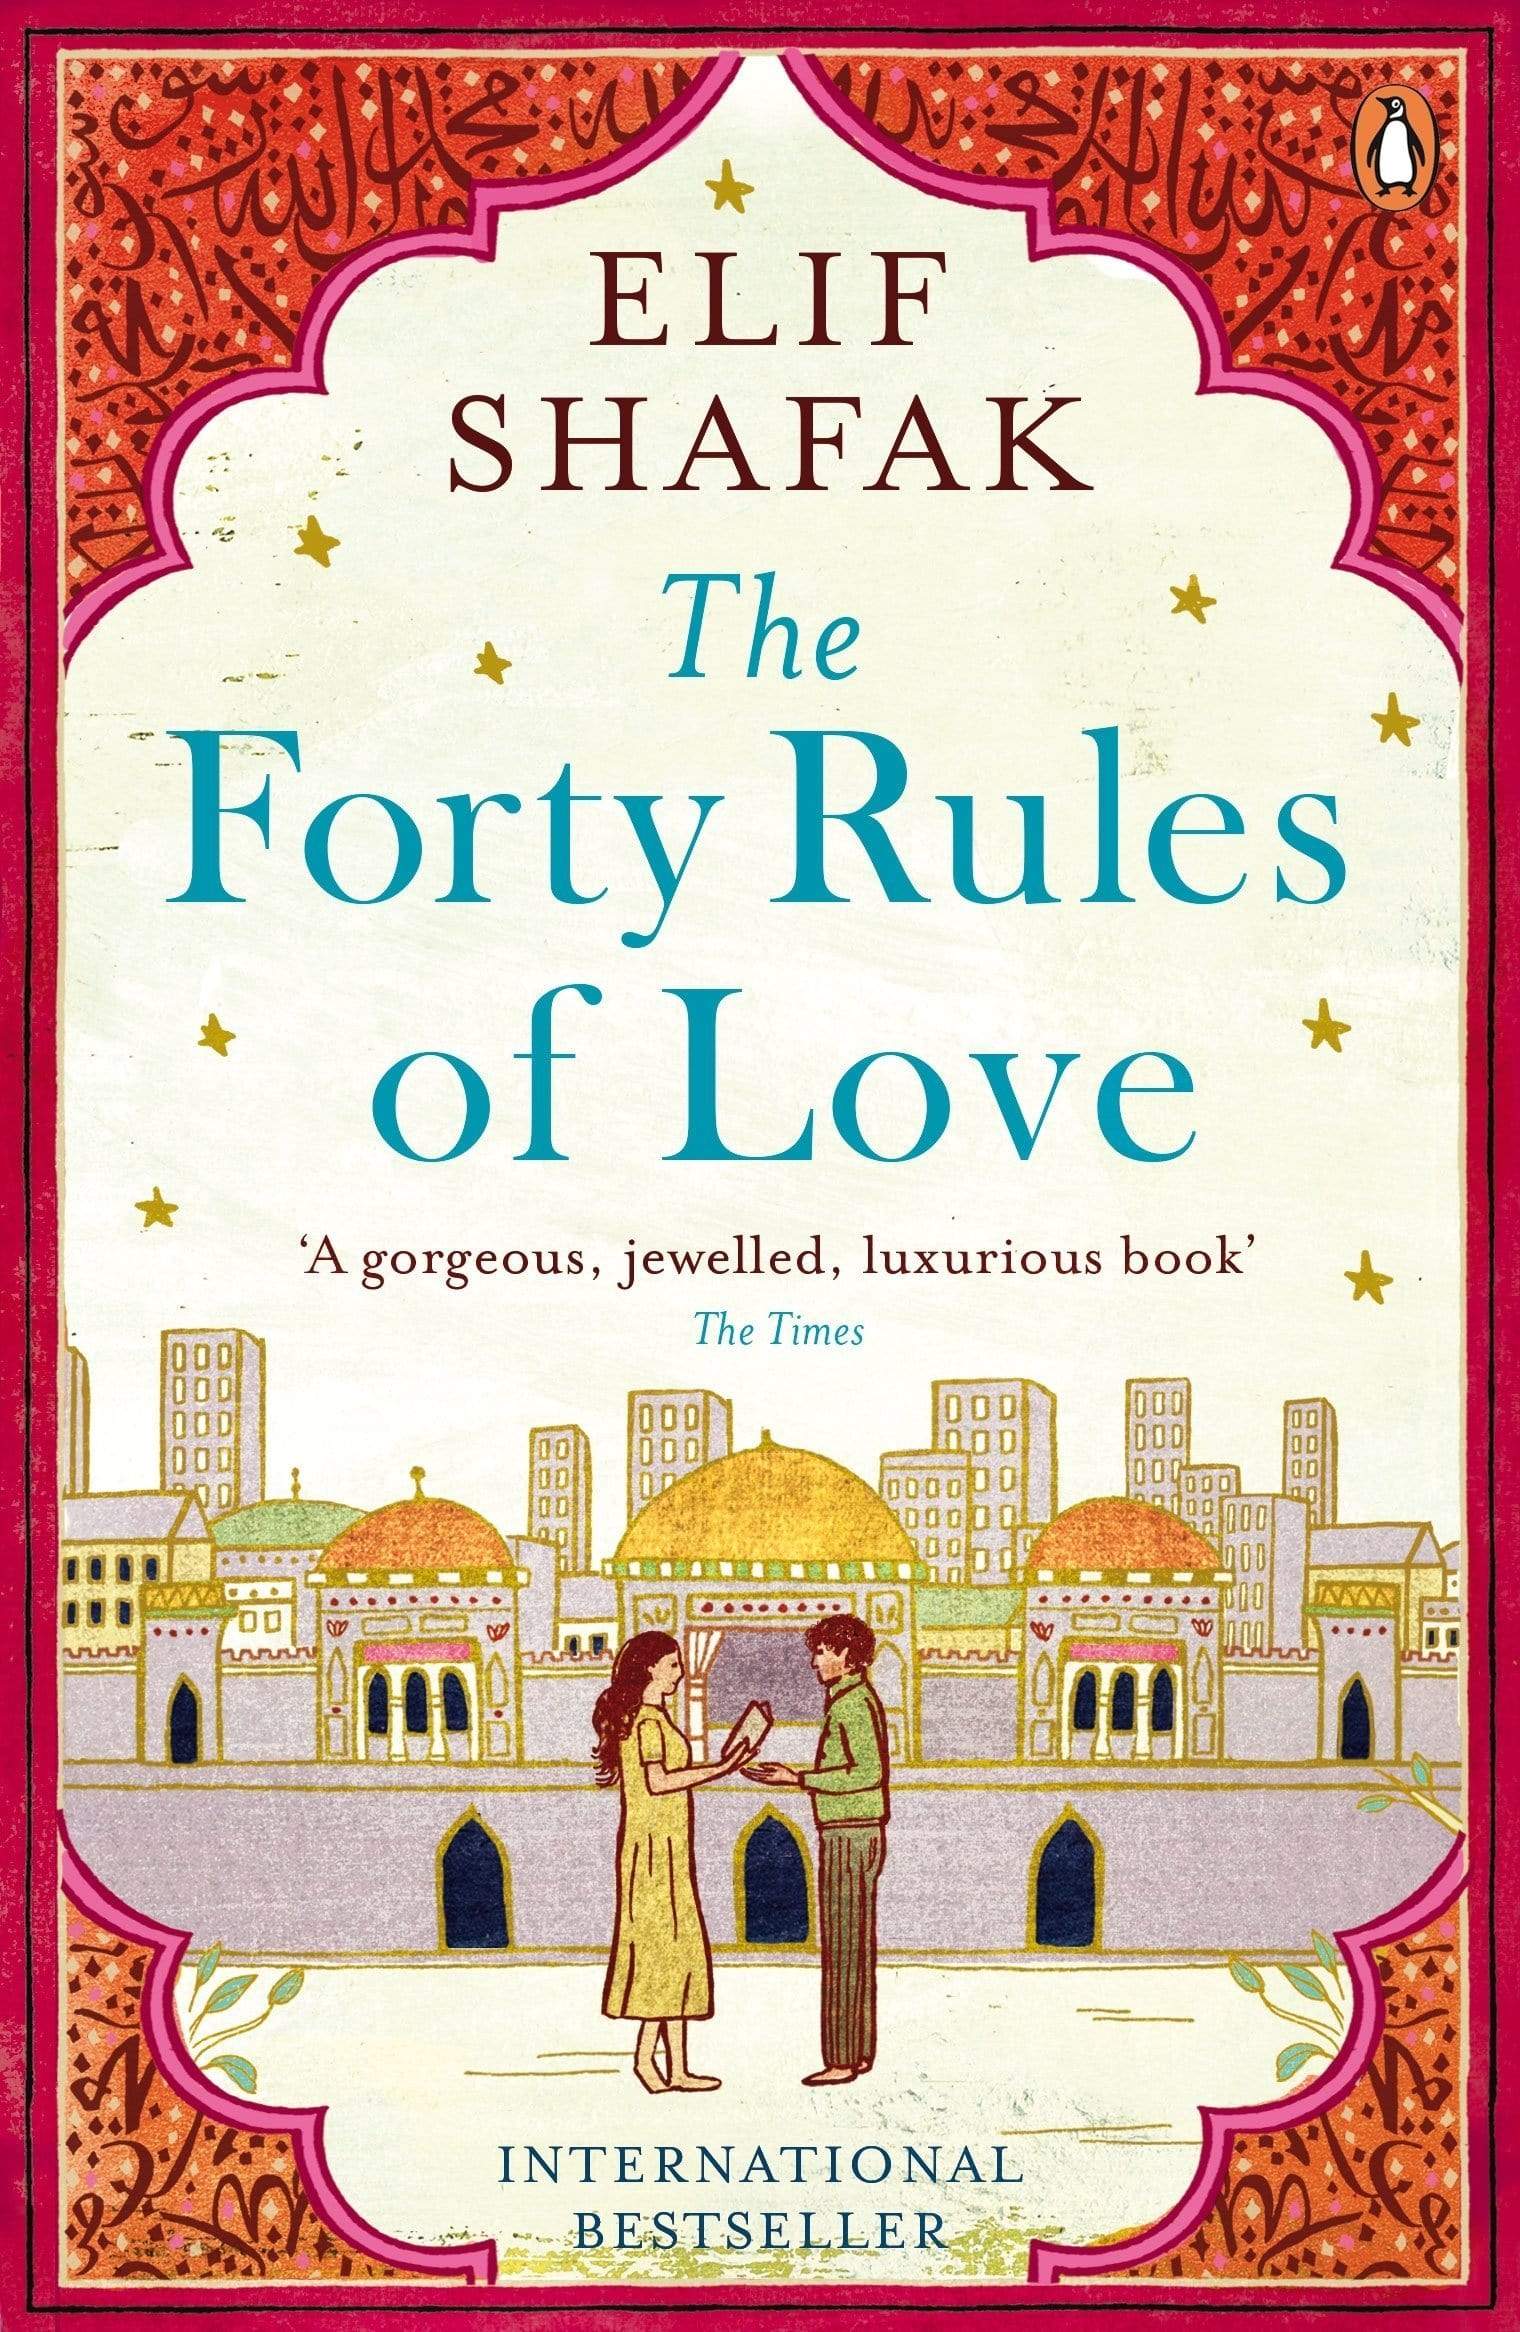 The Forty Rules of Love - Jashanmal Home